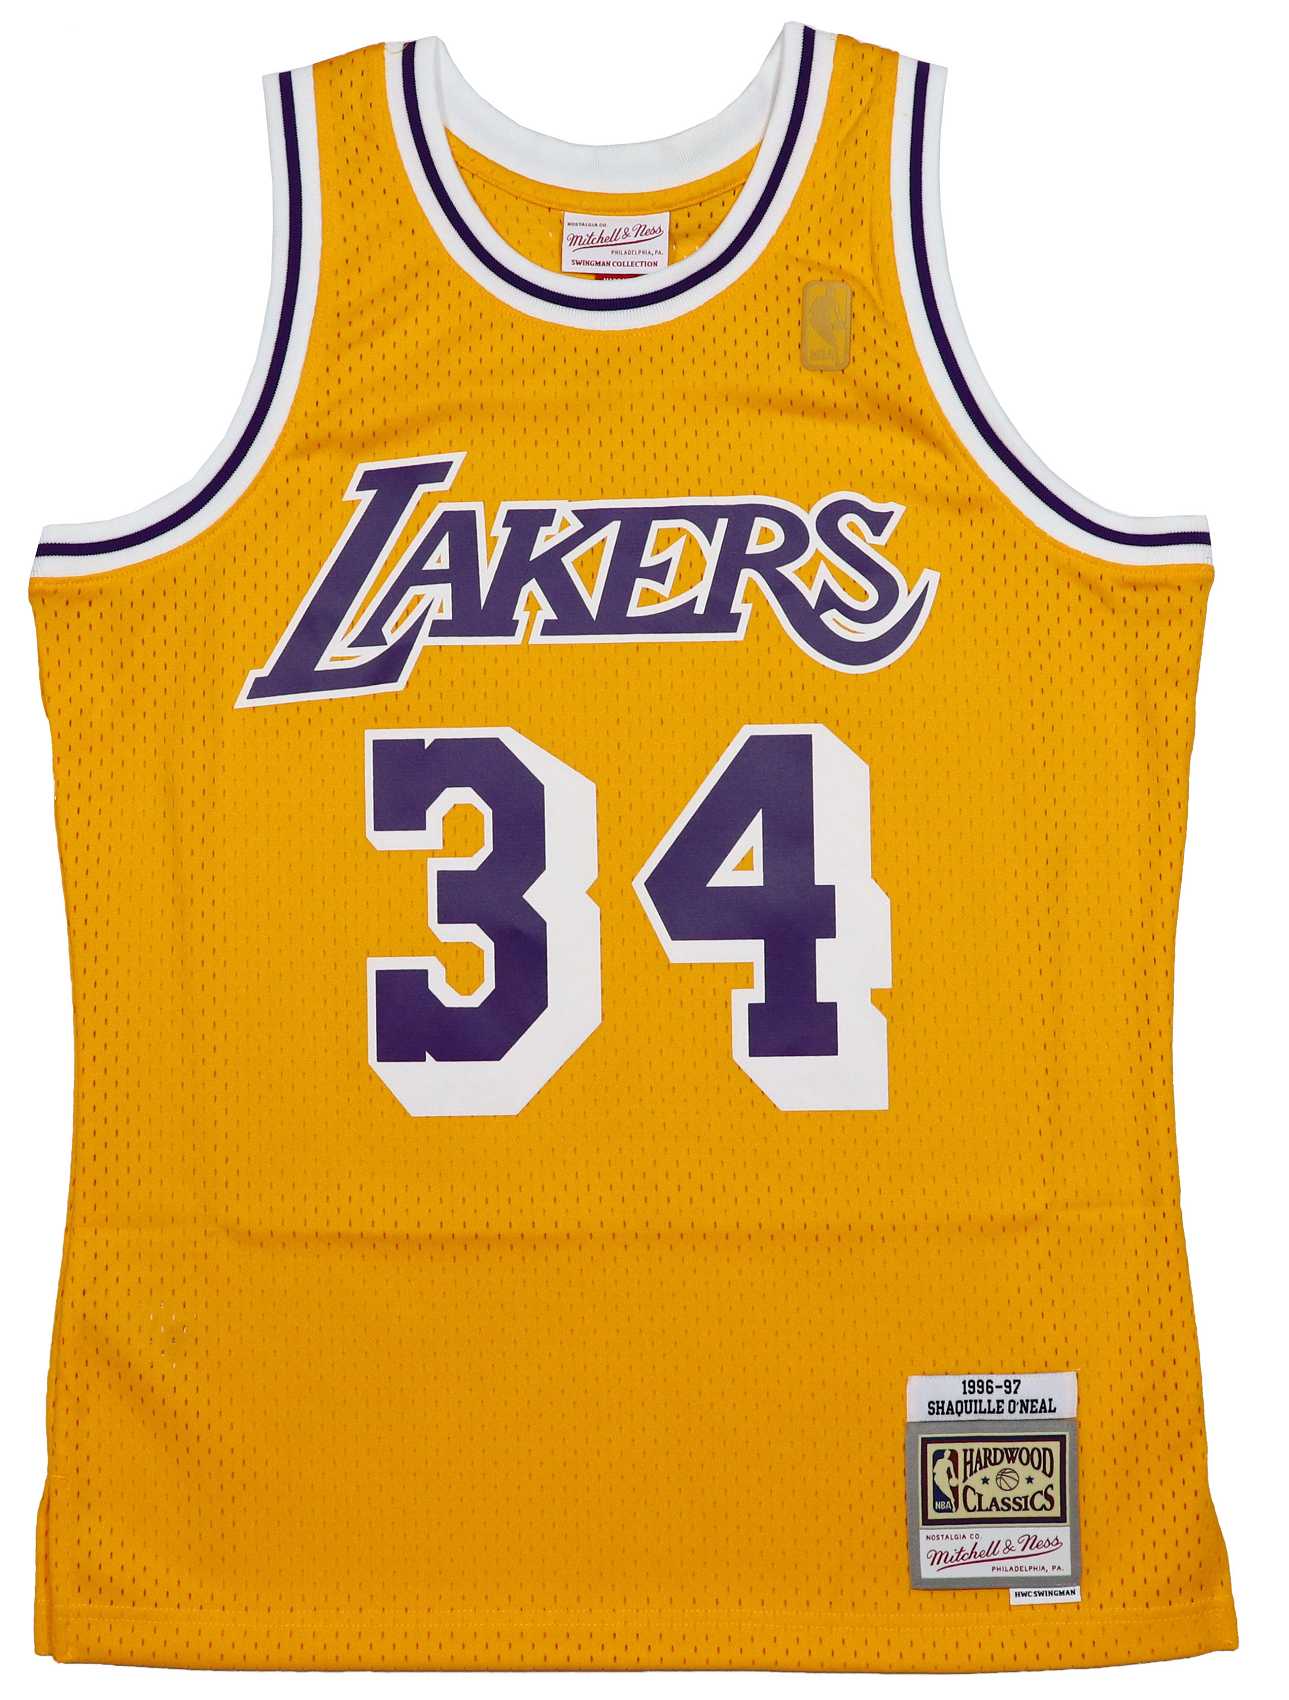 Shaquille Oneal #34 Los Angeles Lakers NBA Swingman Mitchell & Ness